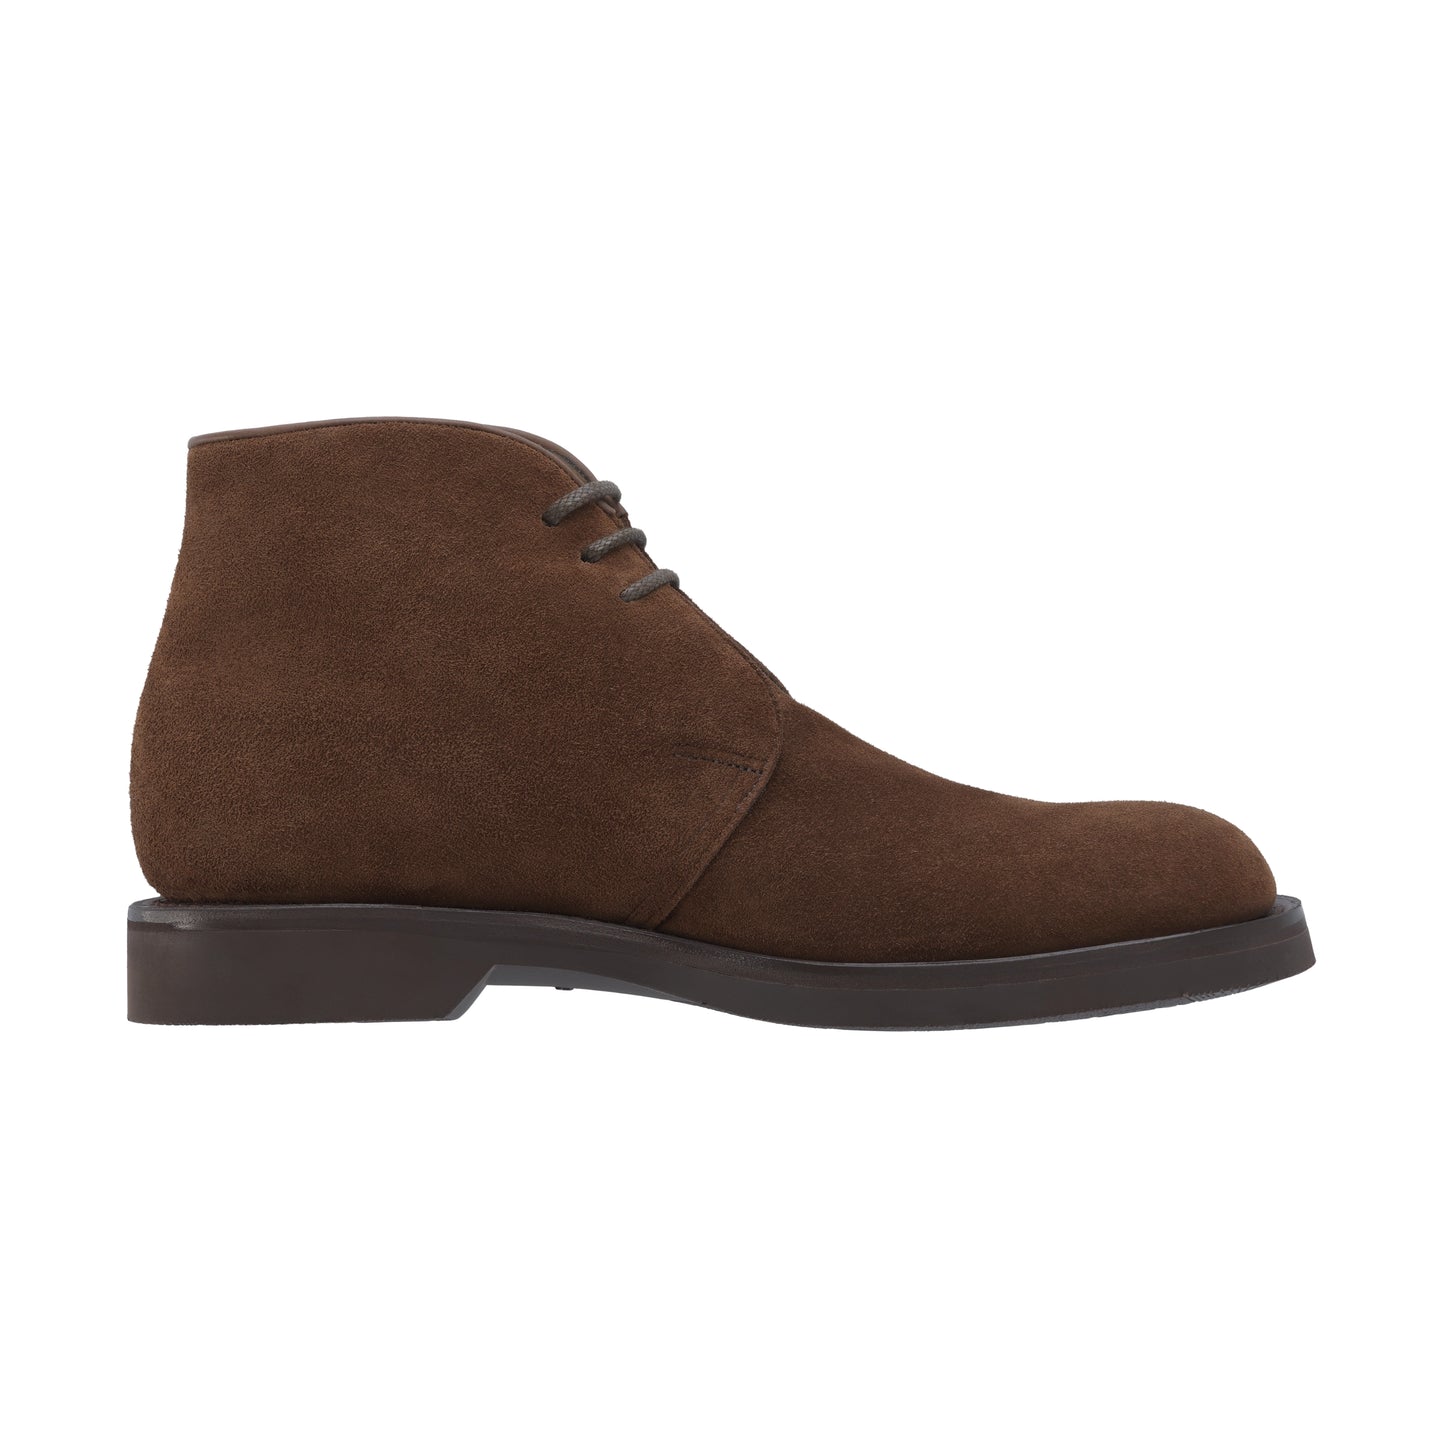 Suede Leather Chukka Boots in Dark Brown